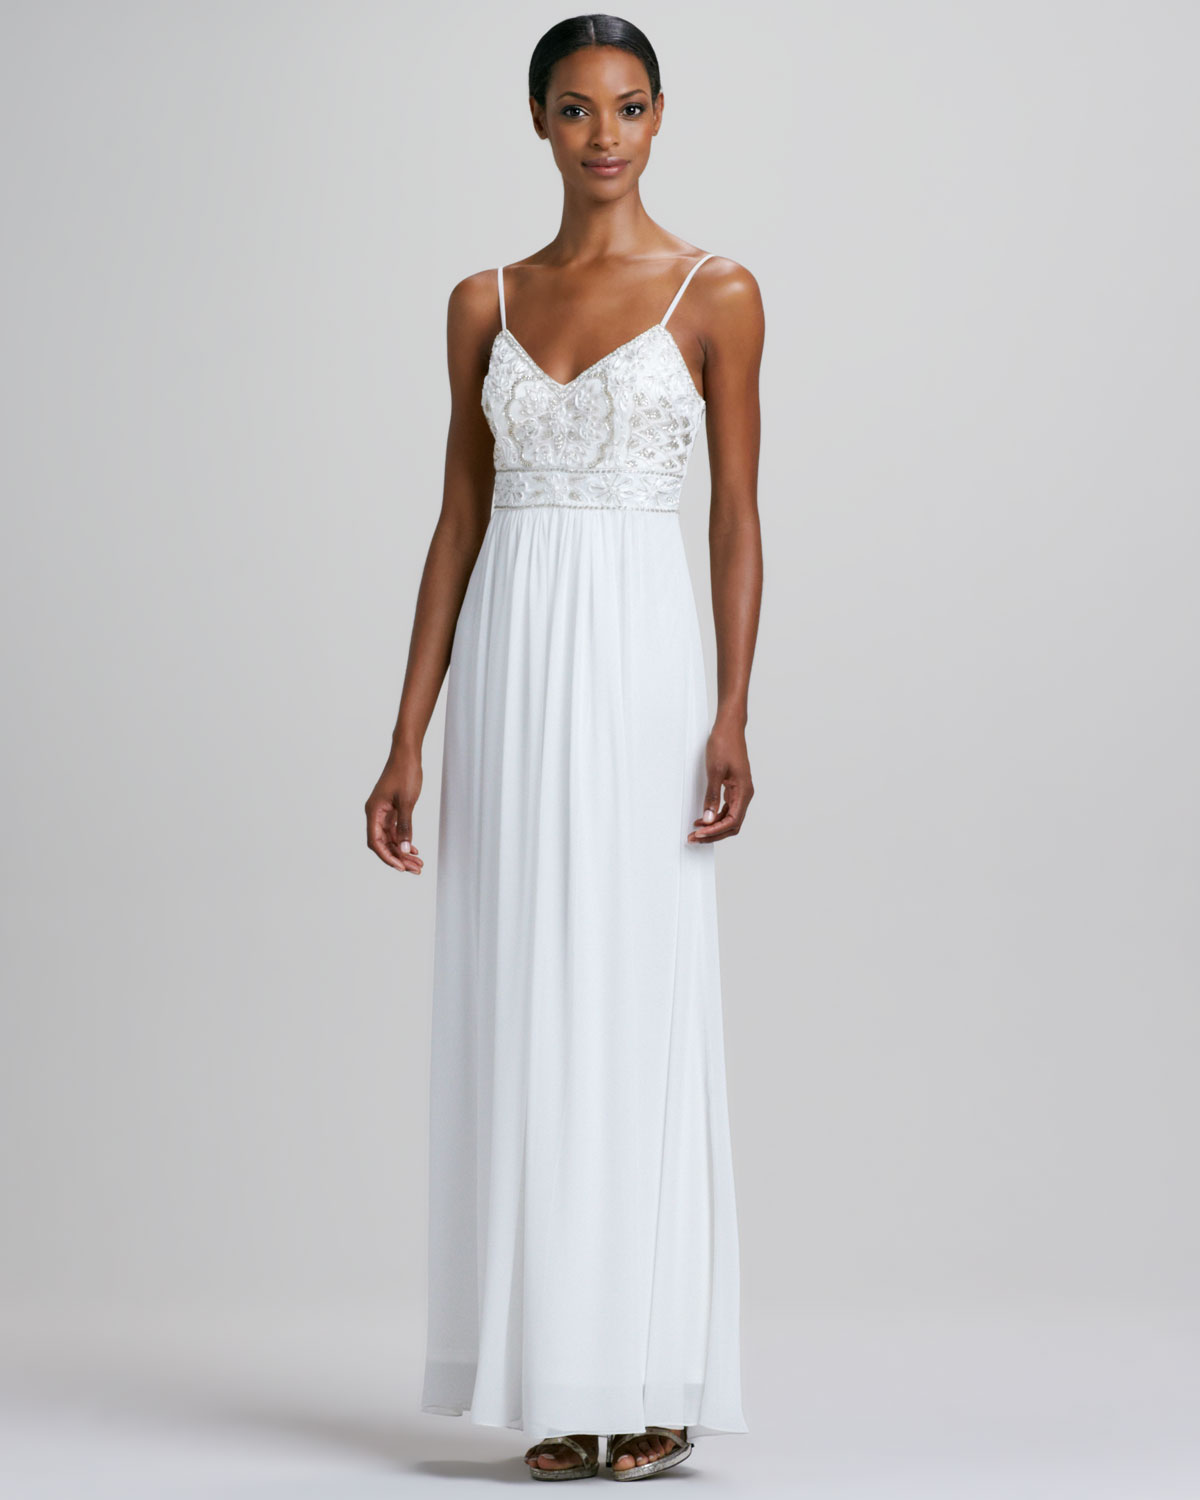 sue wong white spaghettistrap gown product 1 6925674 981643543